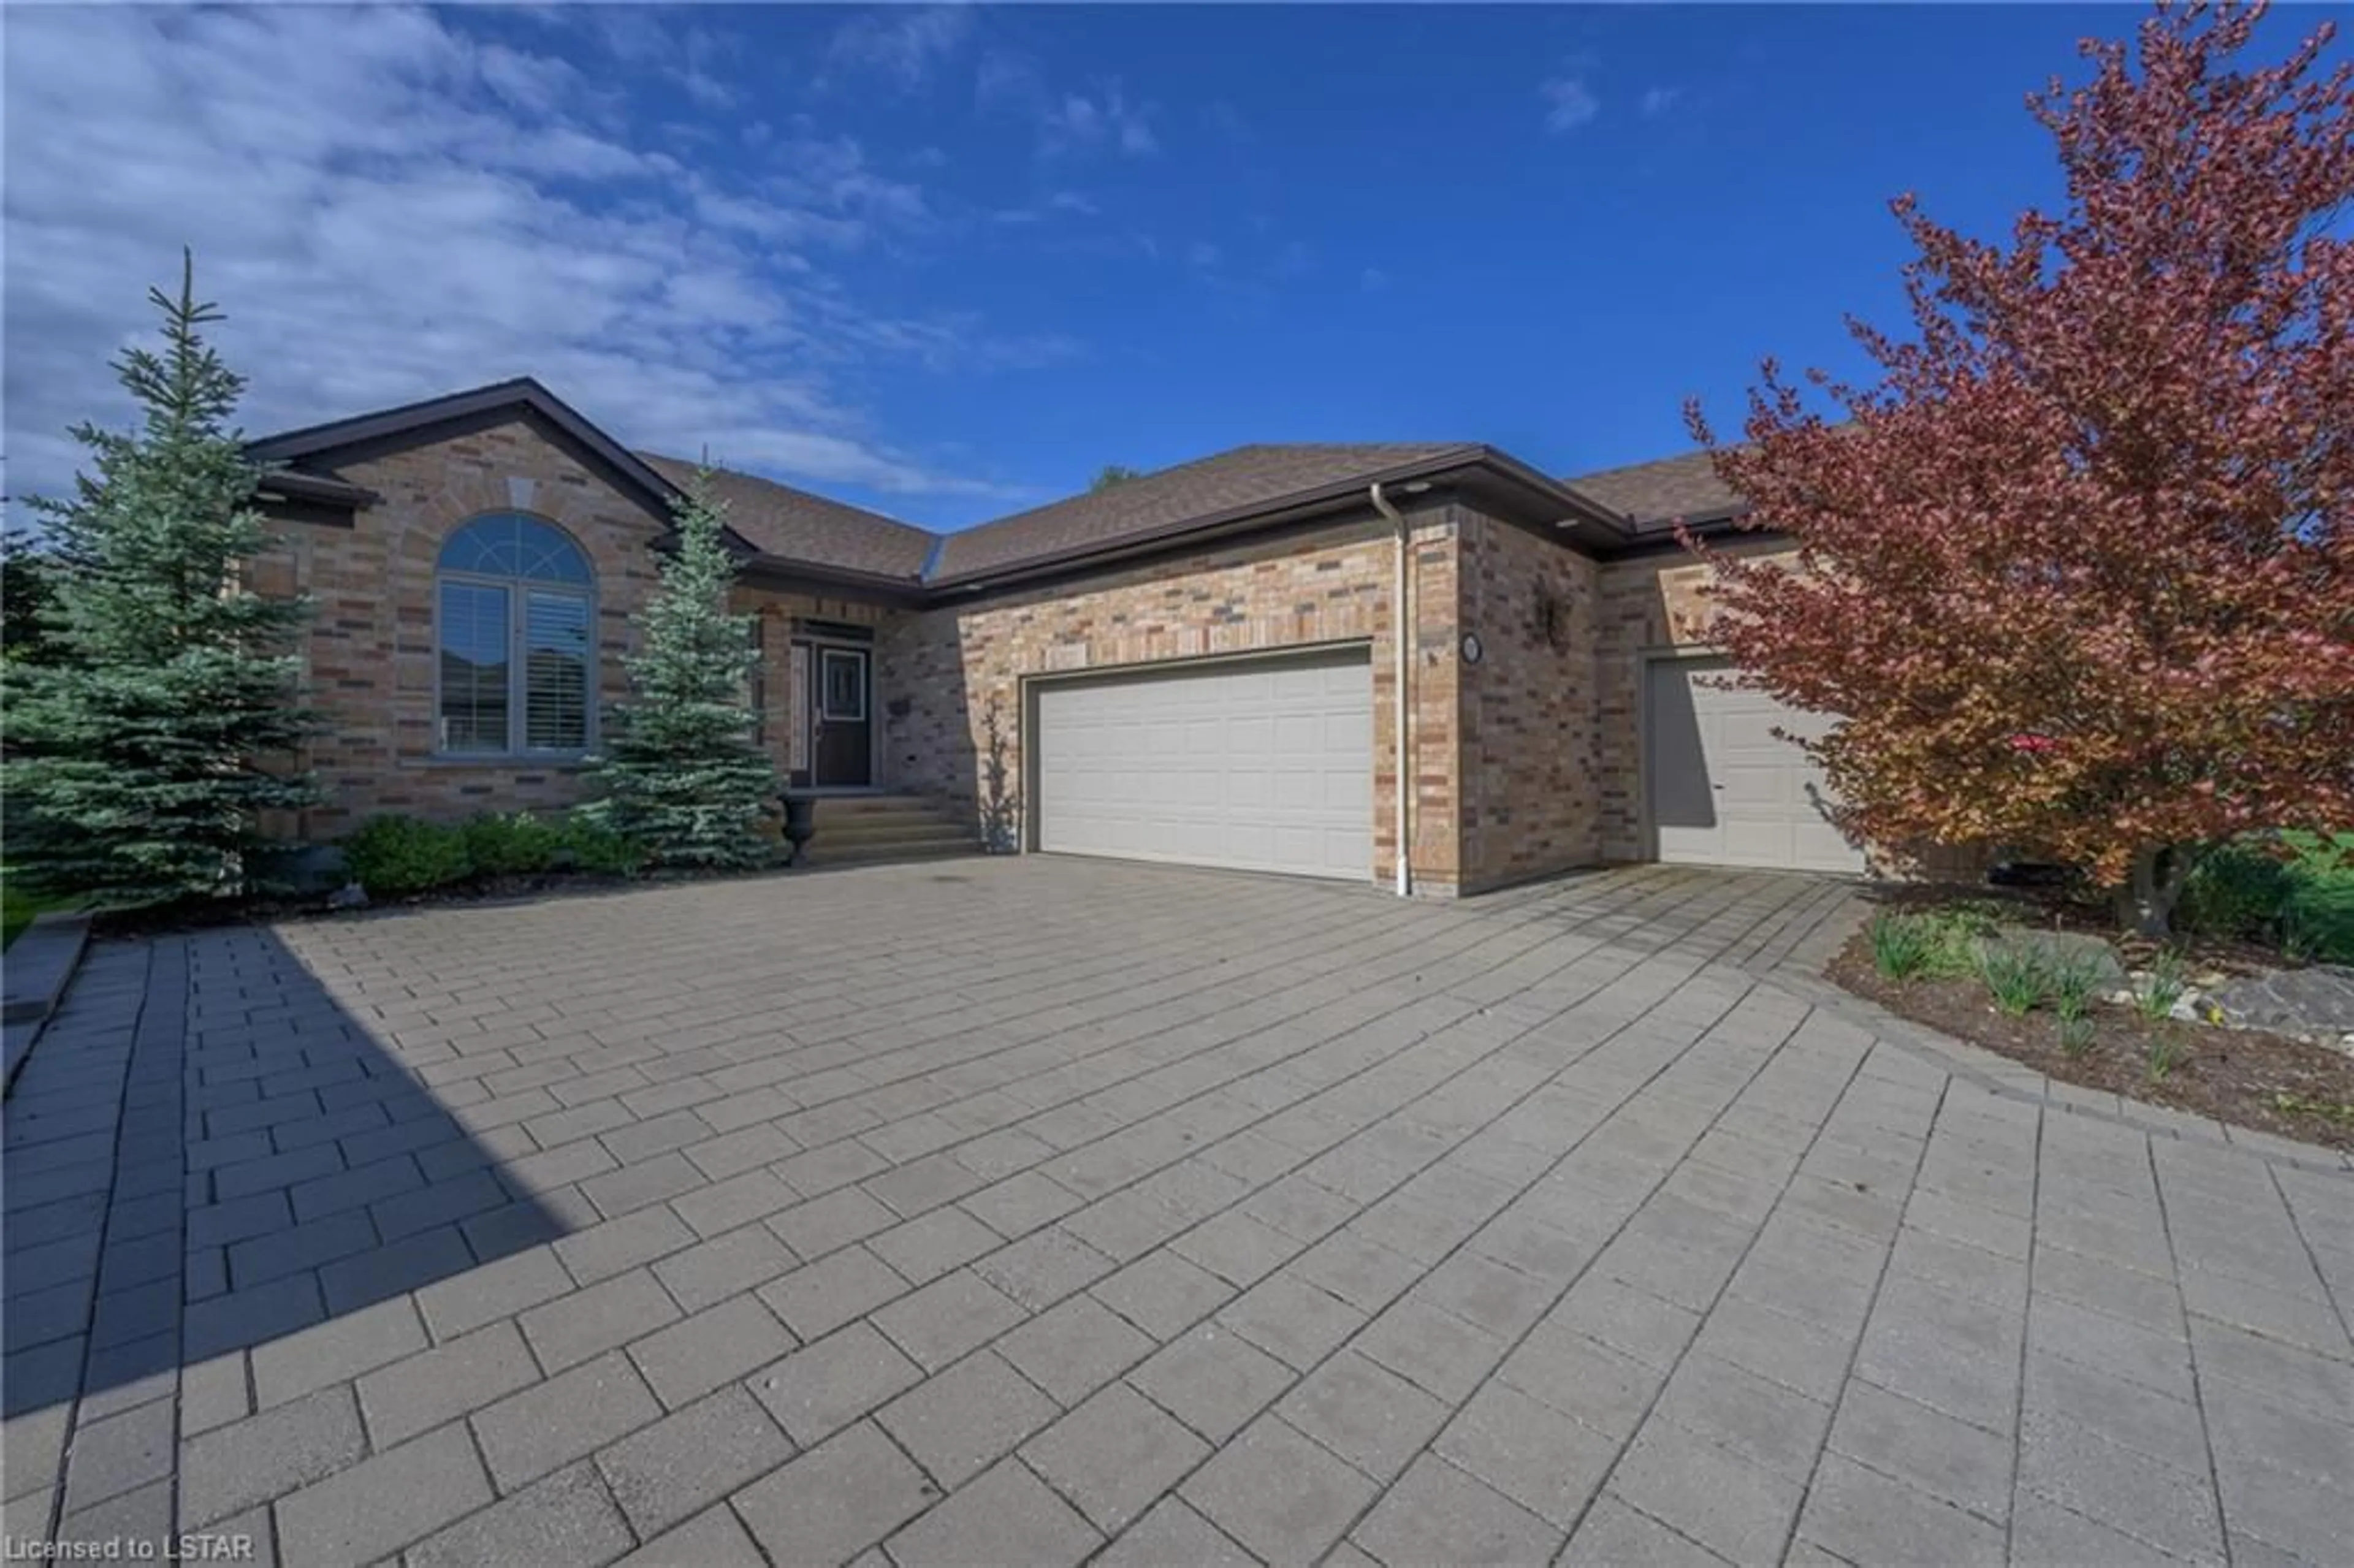 Home with brick exterior material for 2137 Jack Nash Dr, London Ontario N6K 5R1